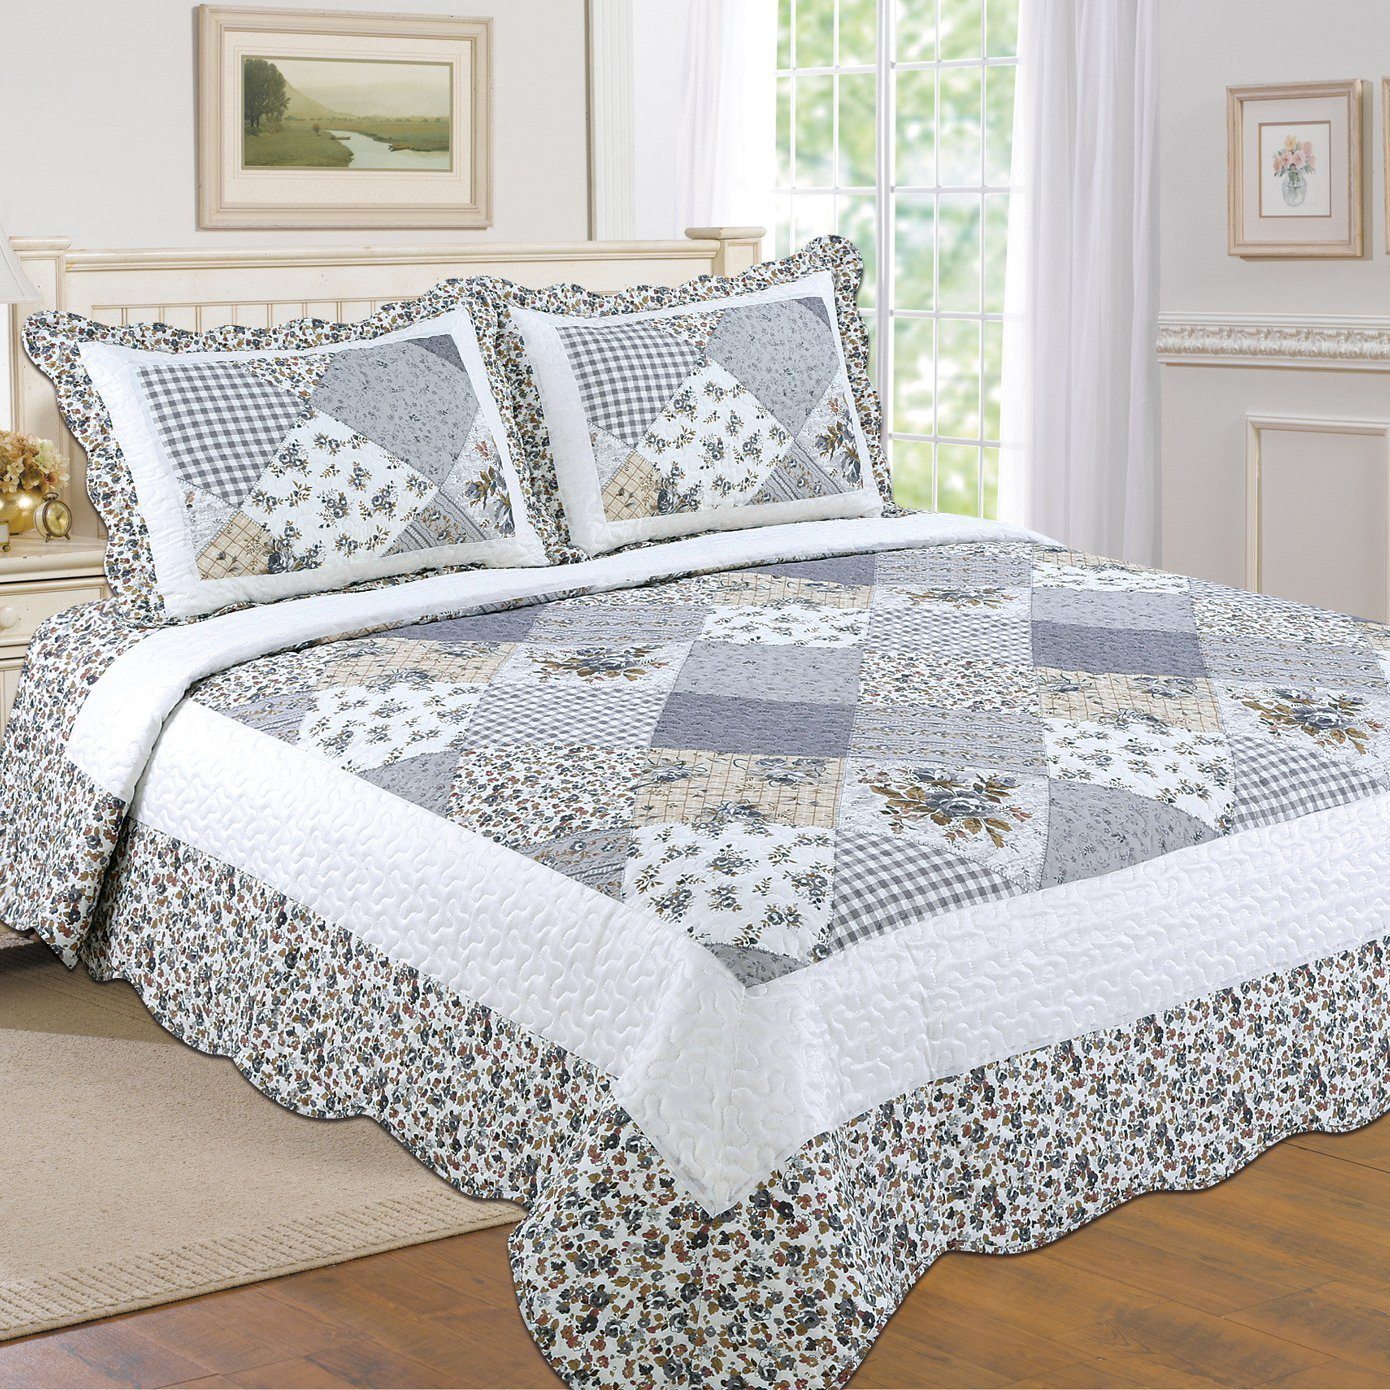 Tradition Premium Printed Reversible Quilt Sets / Gray / King